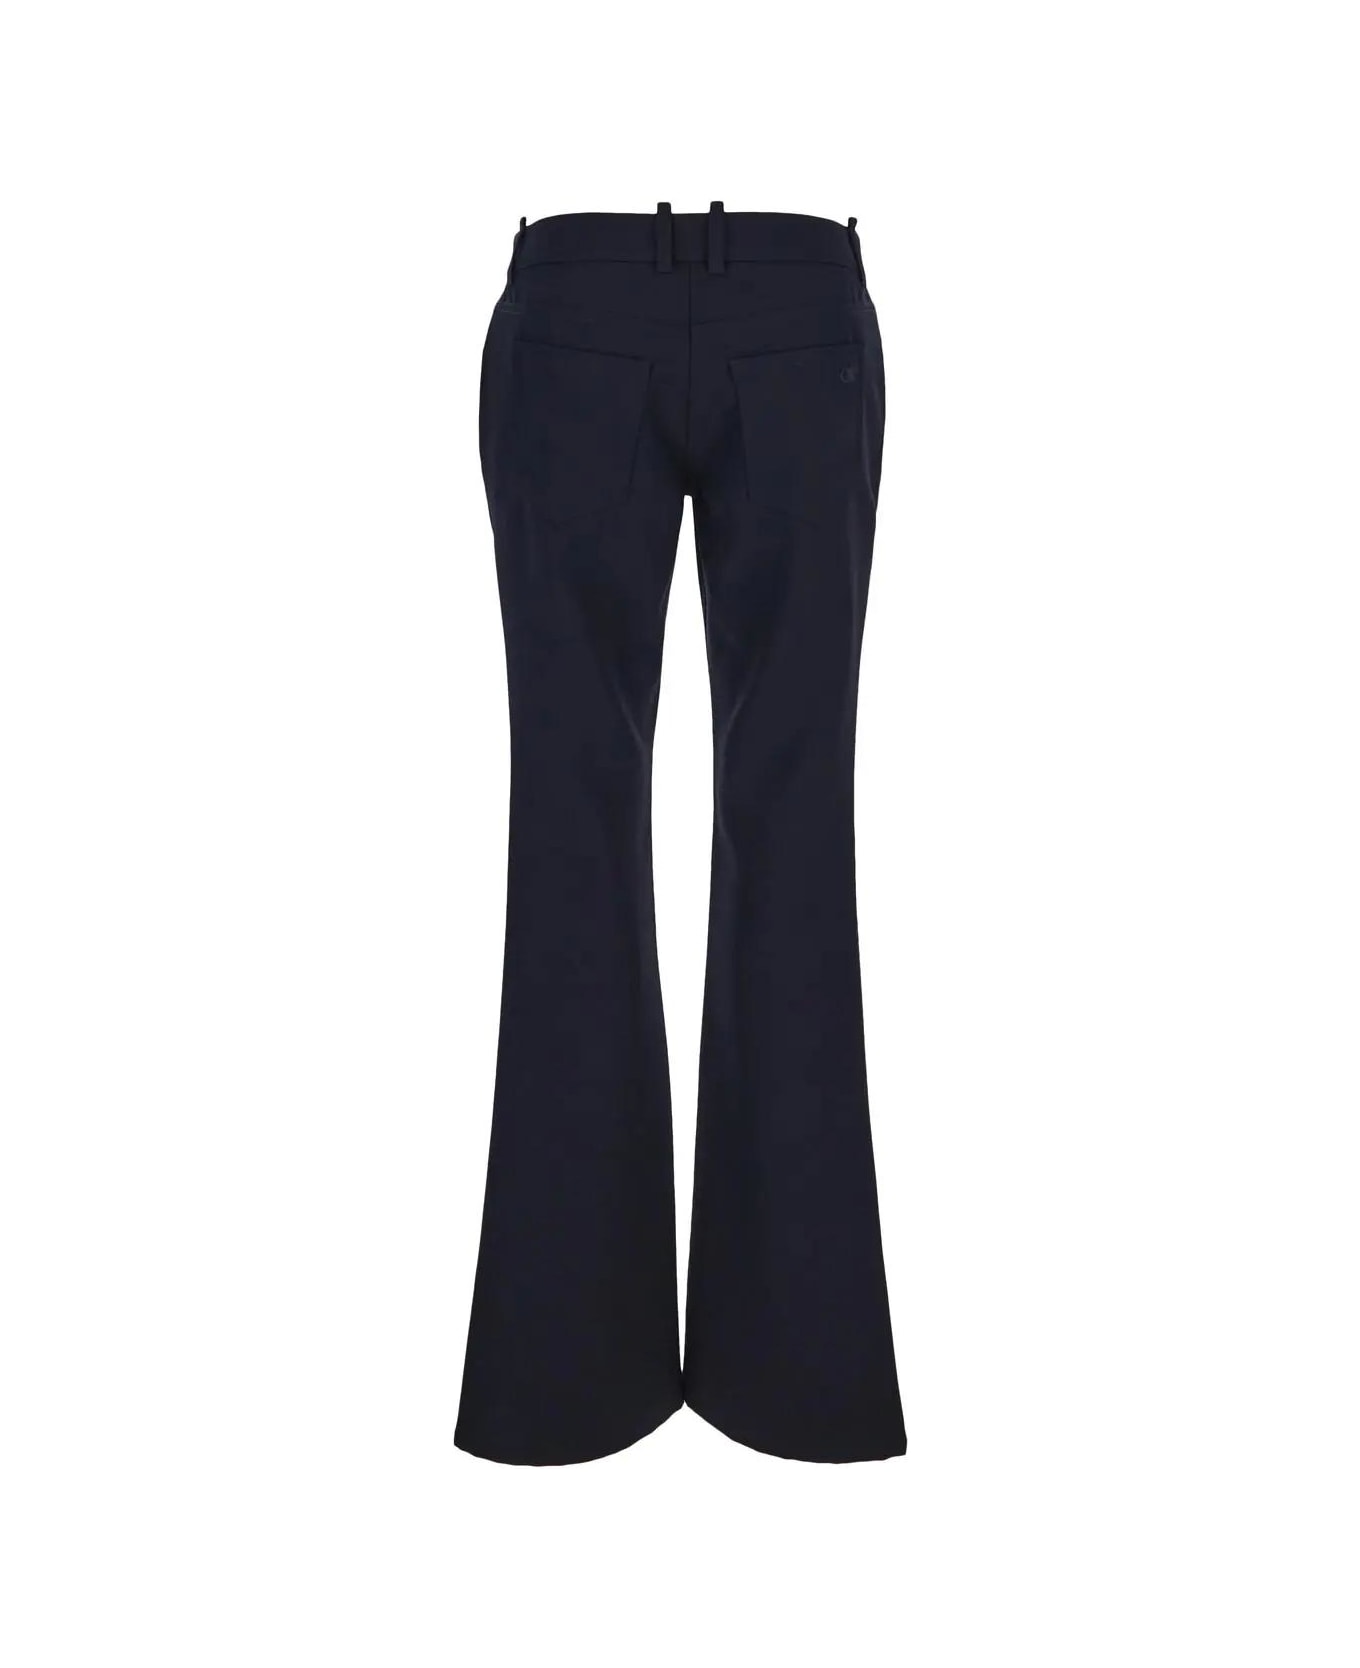 Off-White Dry Wool Slim Flared Trousers - Cobalt Blue